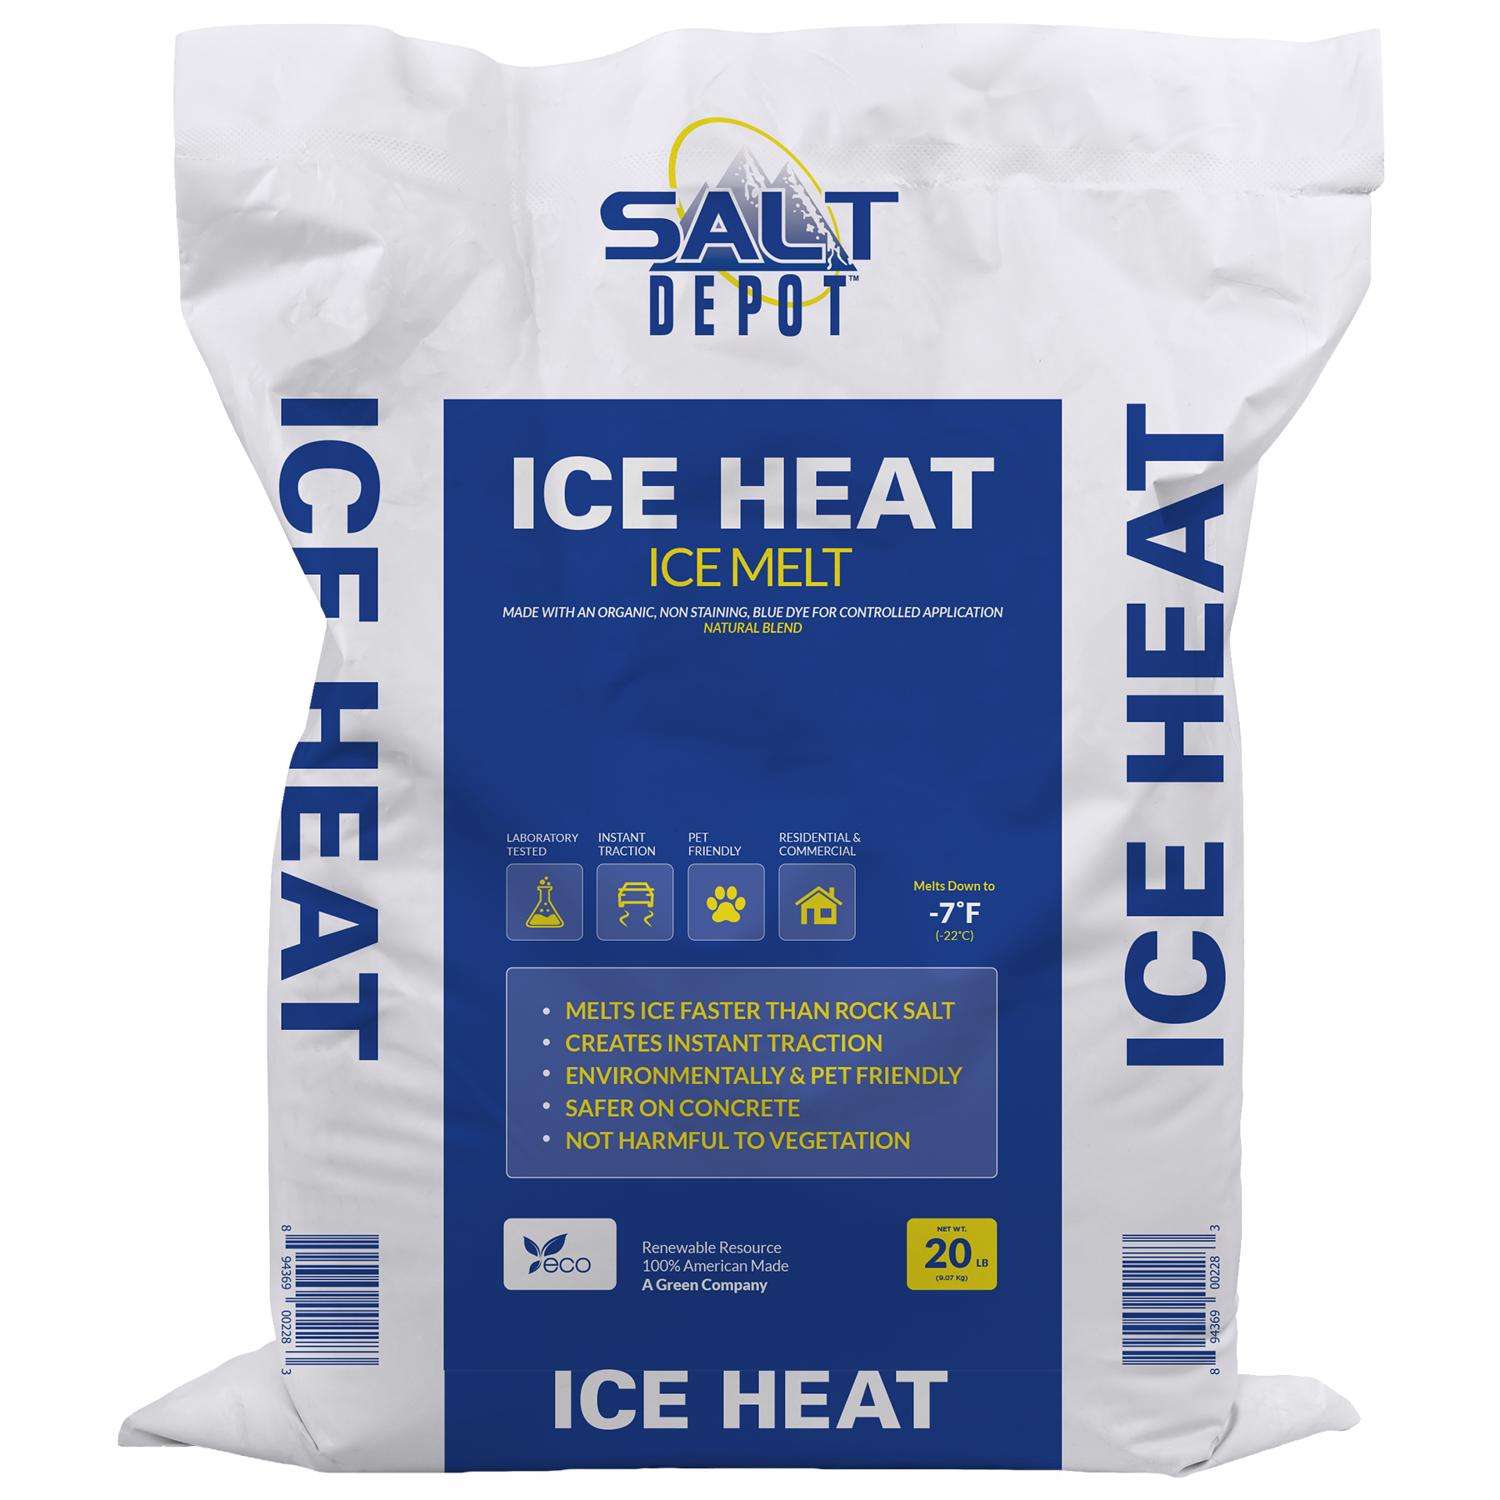 Salty Dog Salt Ice 5Kg(Click & Collect Only)